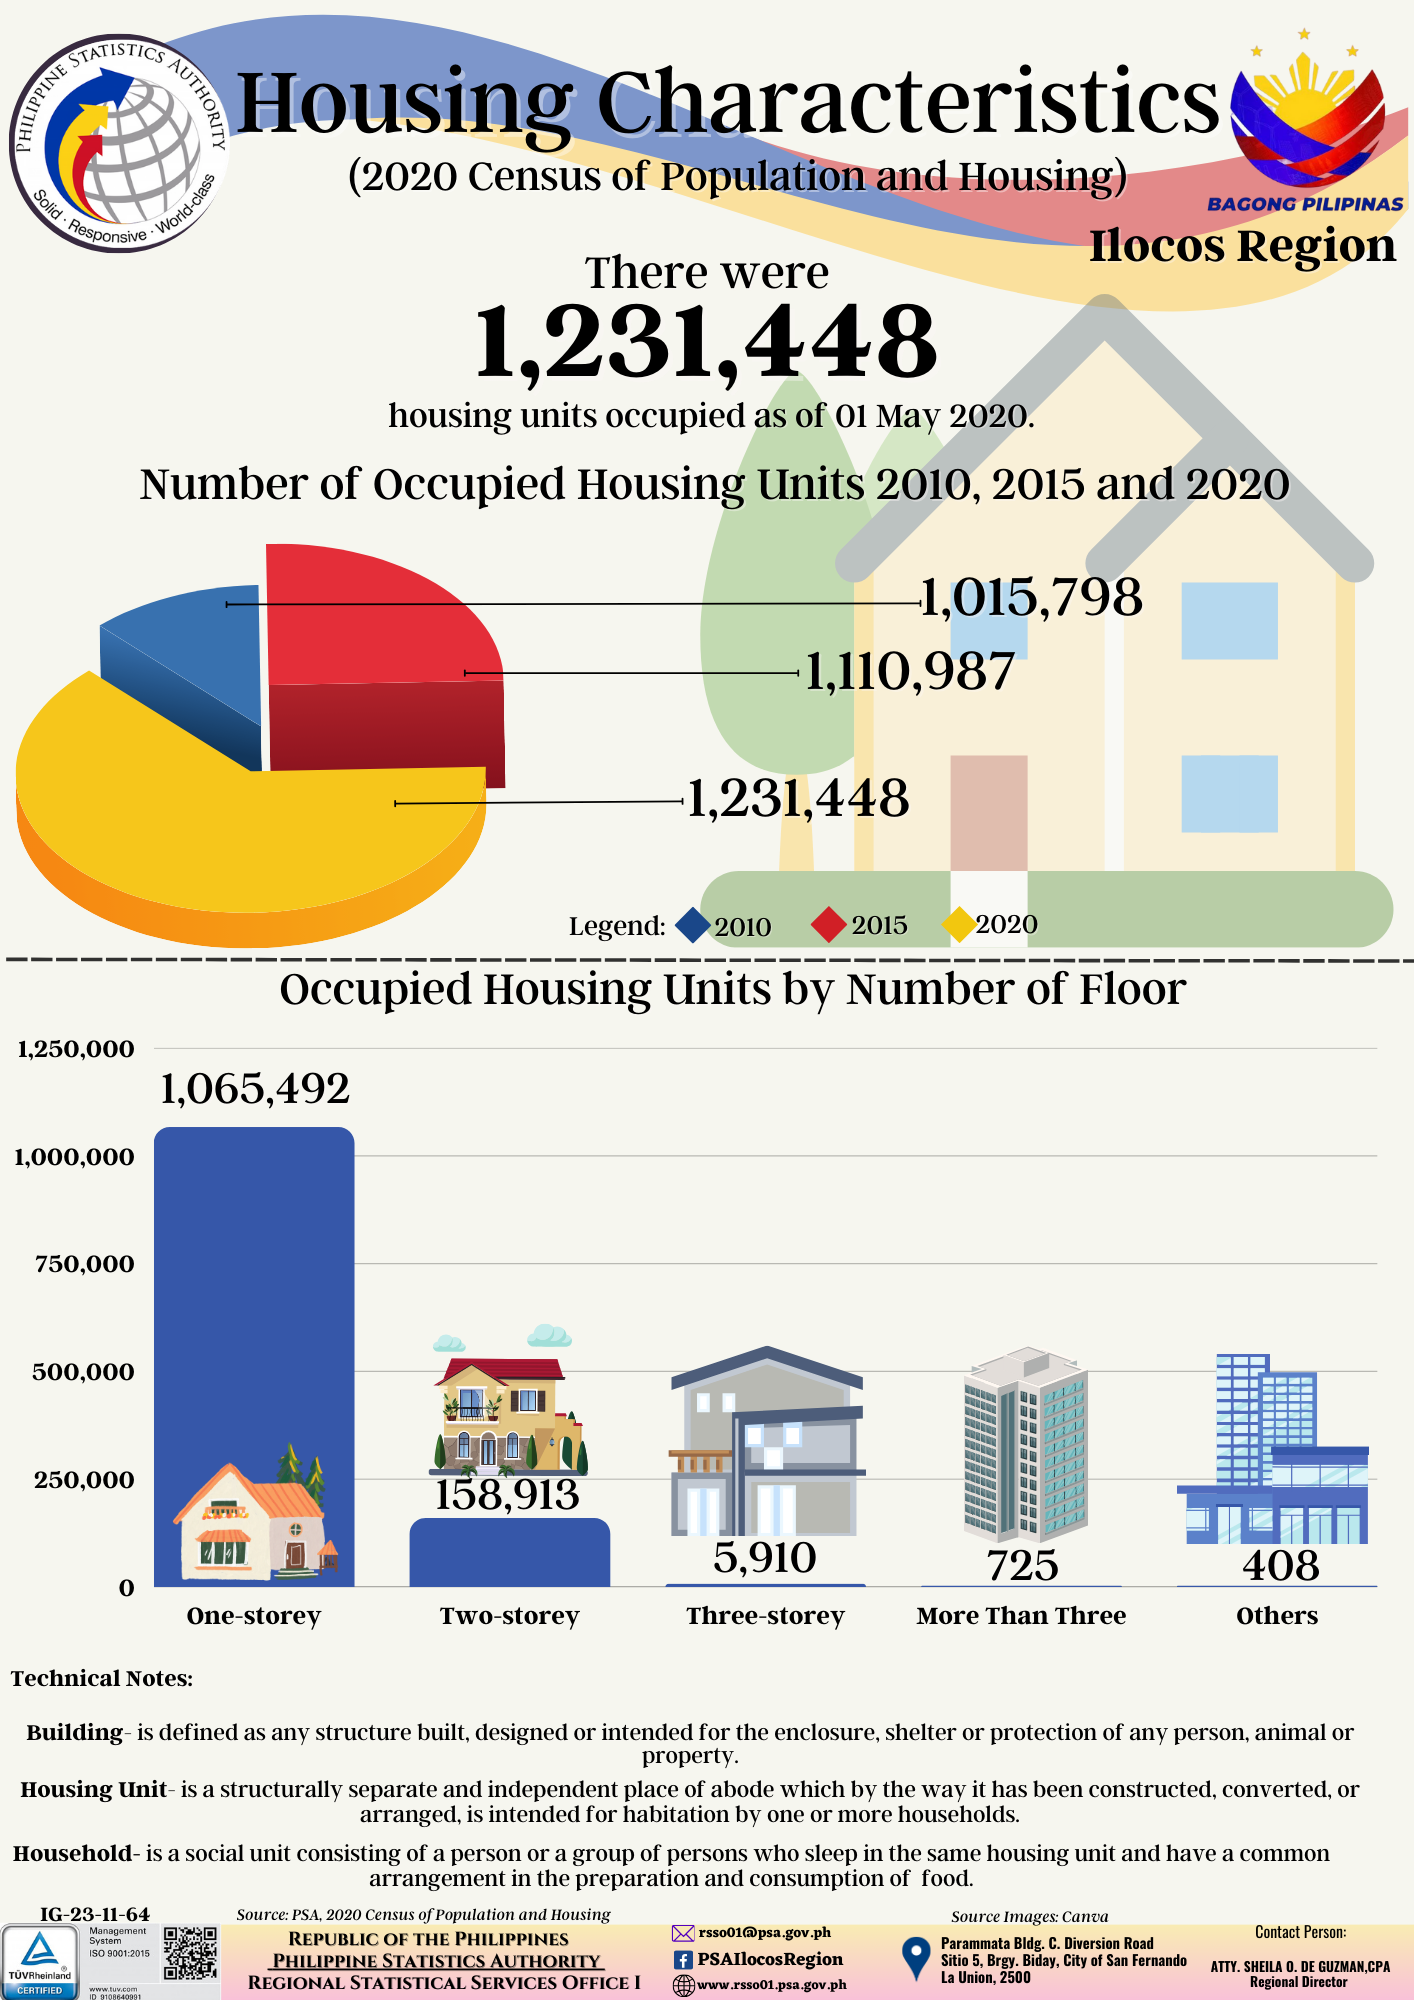 Housing Characteristics in the Ilocos Region based on the 2020 CPH